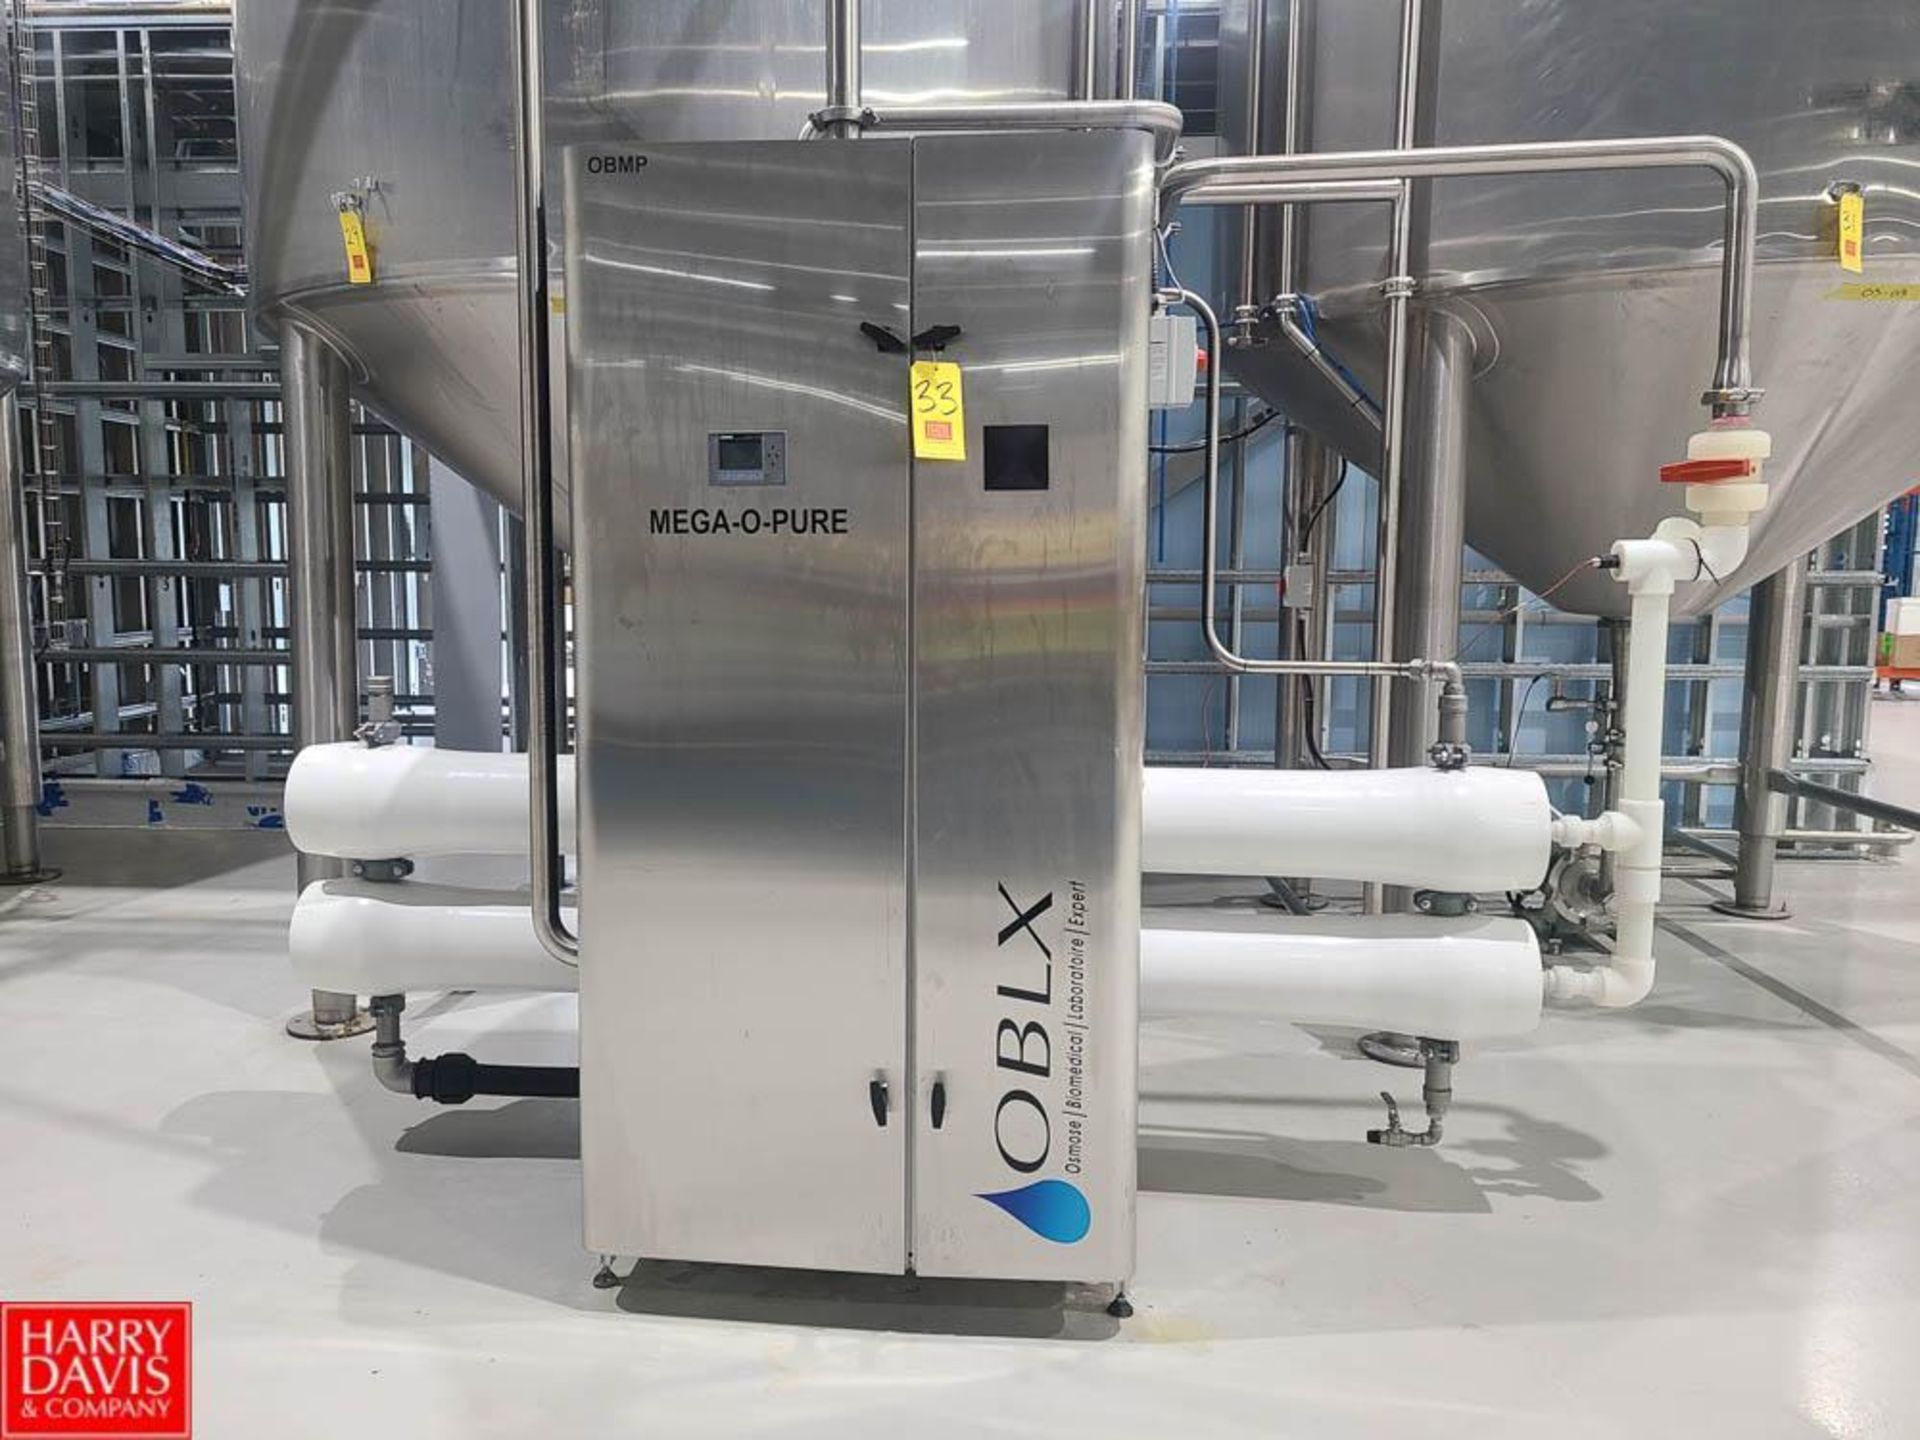 2021 OBLX 2-Tube Reverse Osmosis System, 60 LPM Model: MEGA-O-PURE with Pentair, Tubes, Pump,Siemens